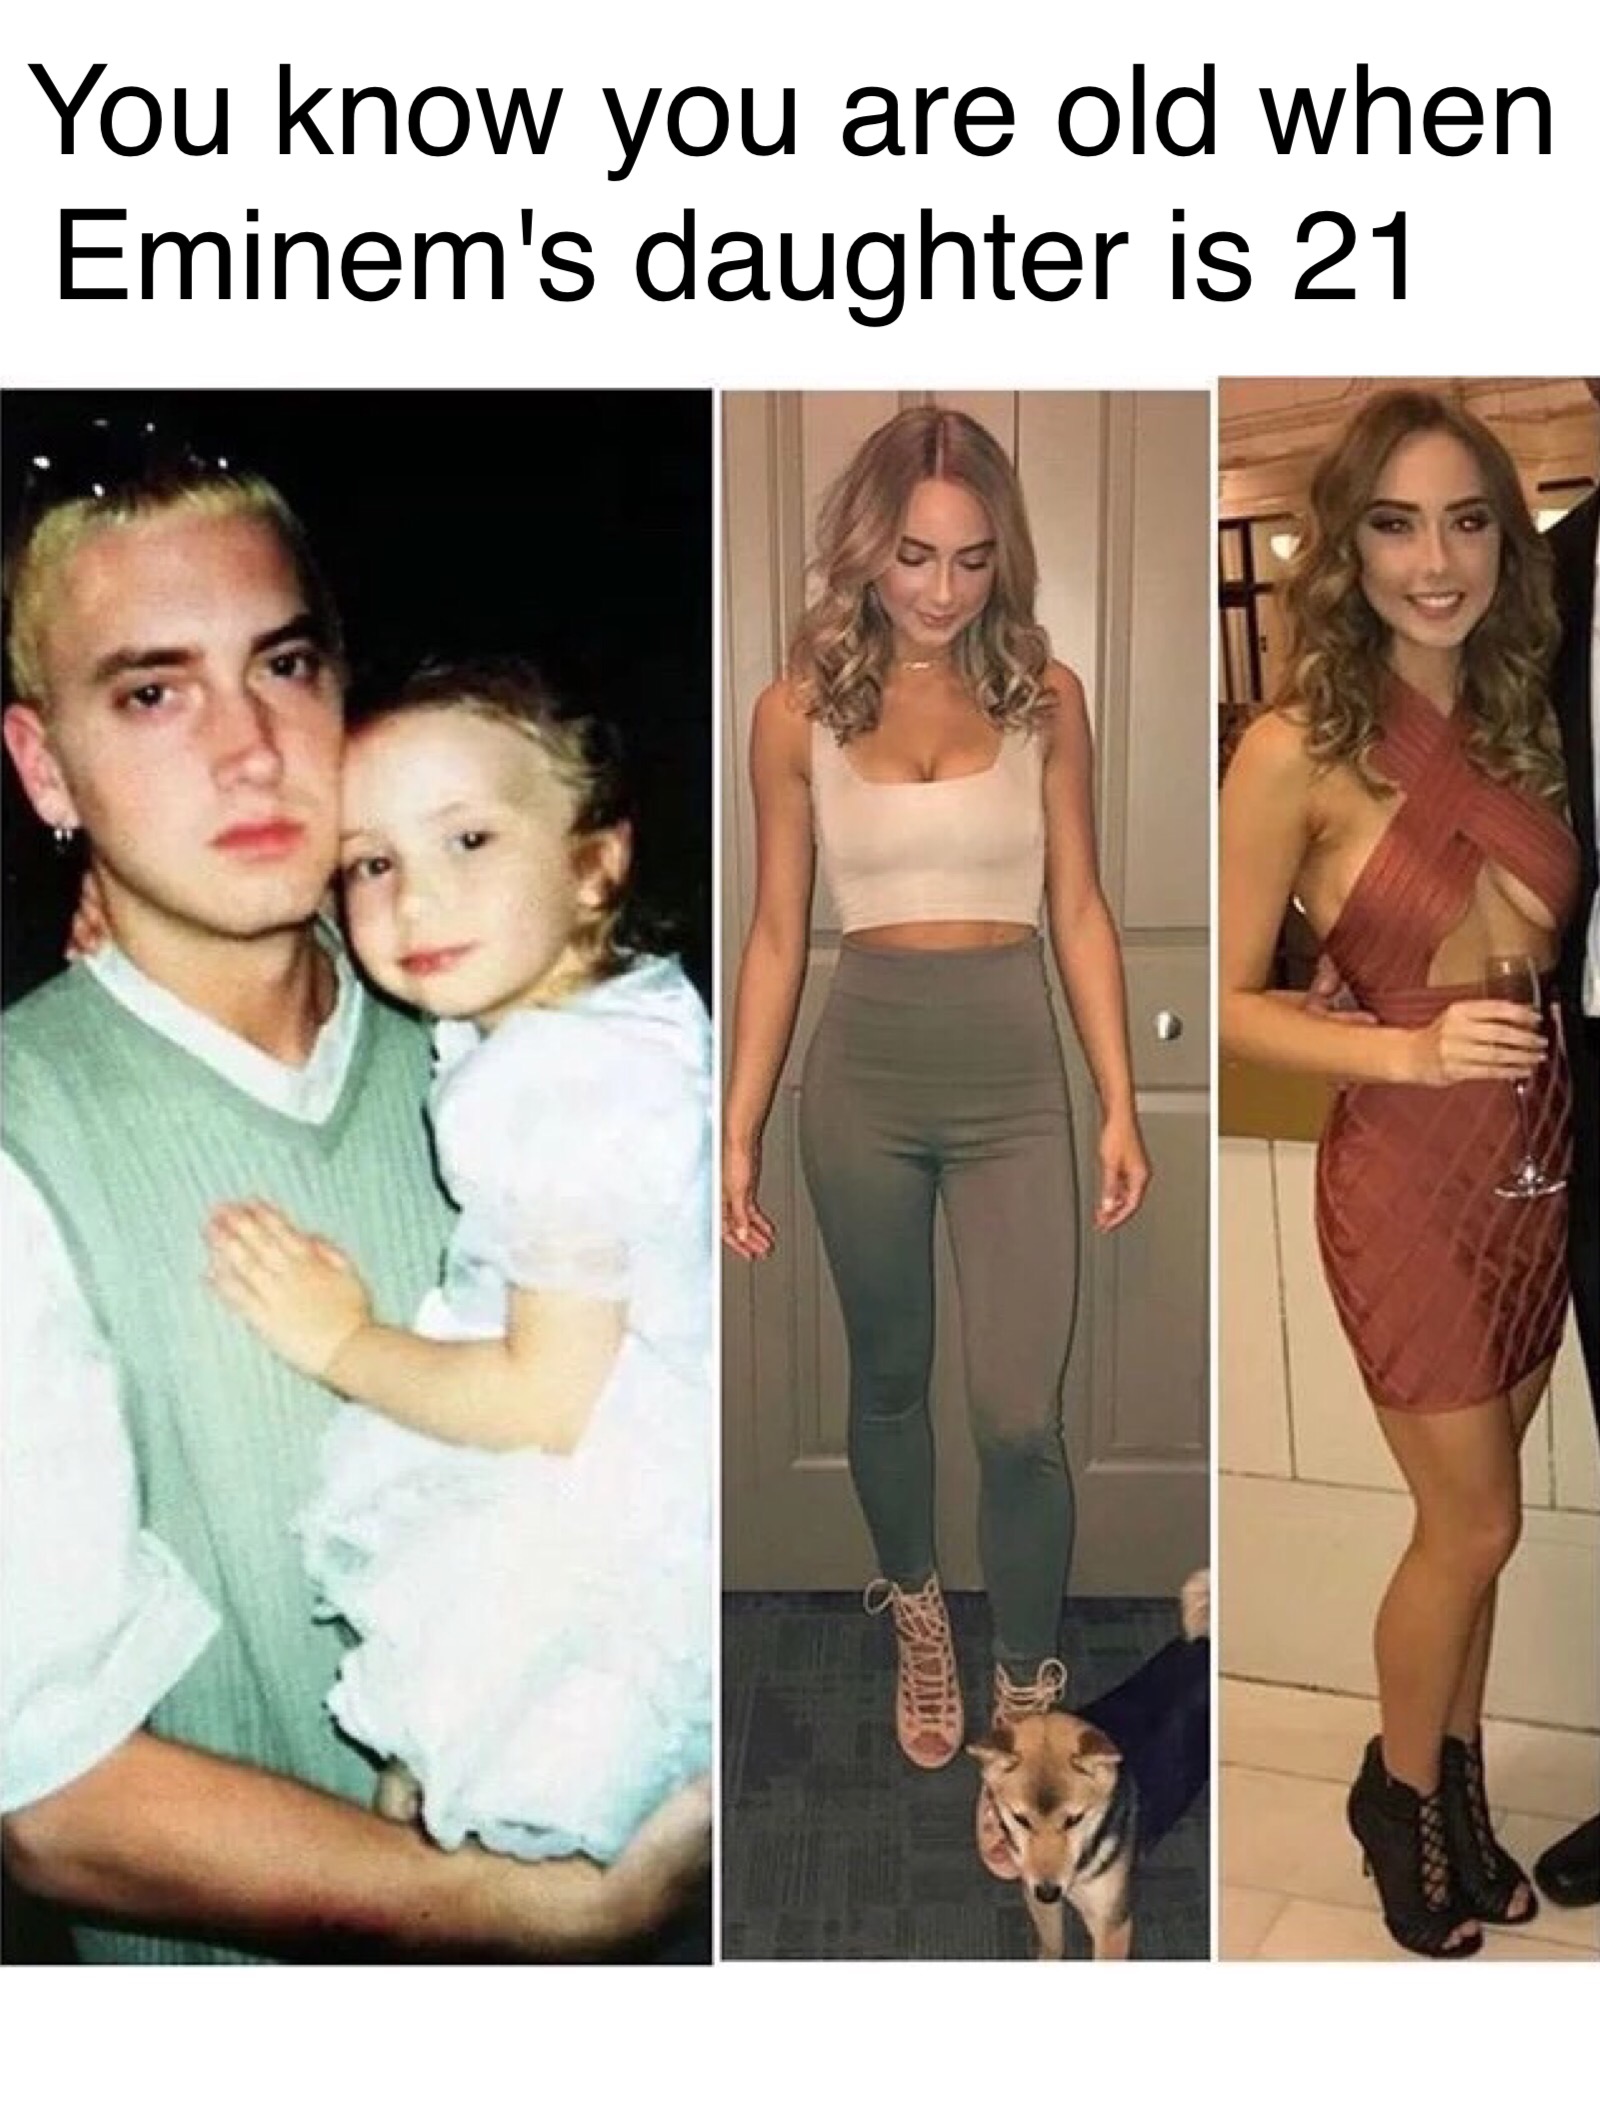 memes about the weekend - You know you are old when Eminem's daughter is 21